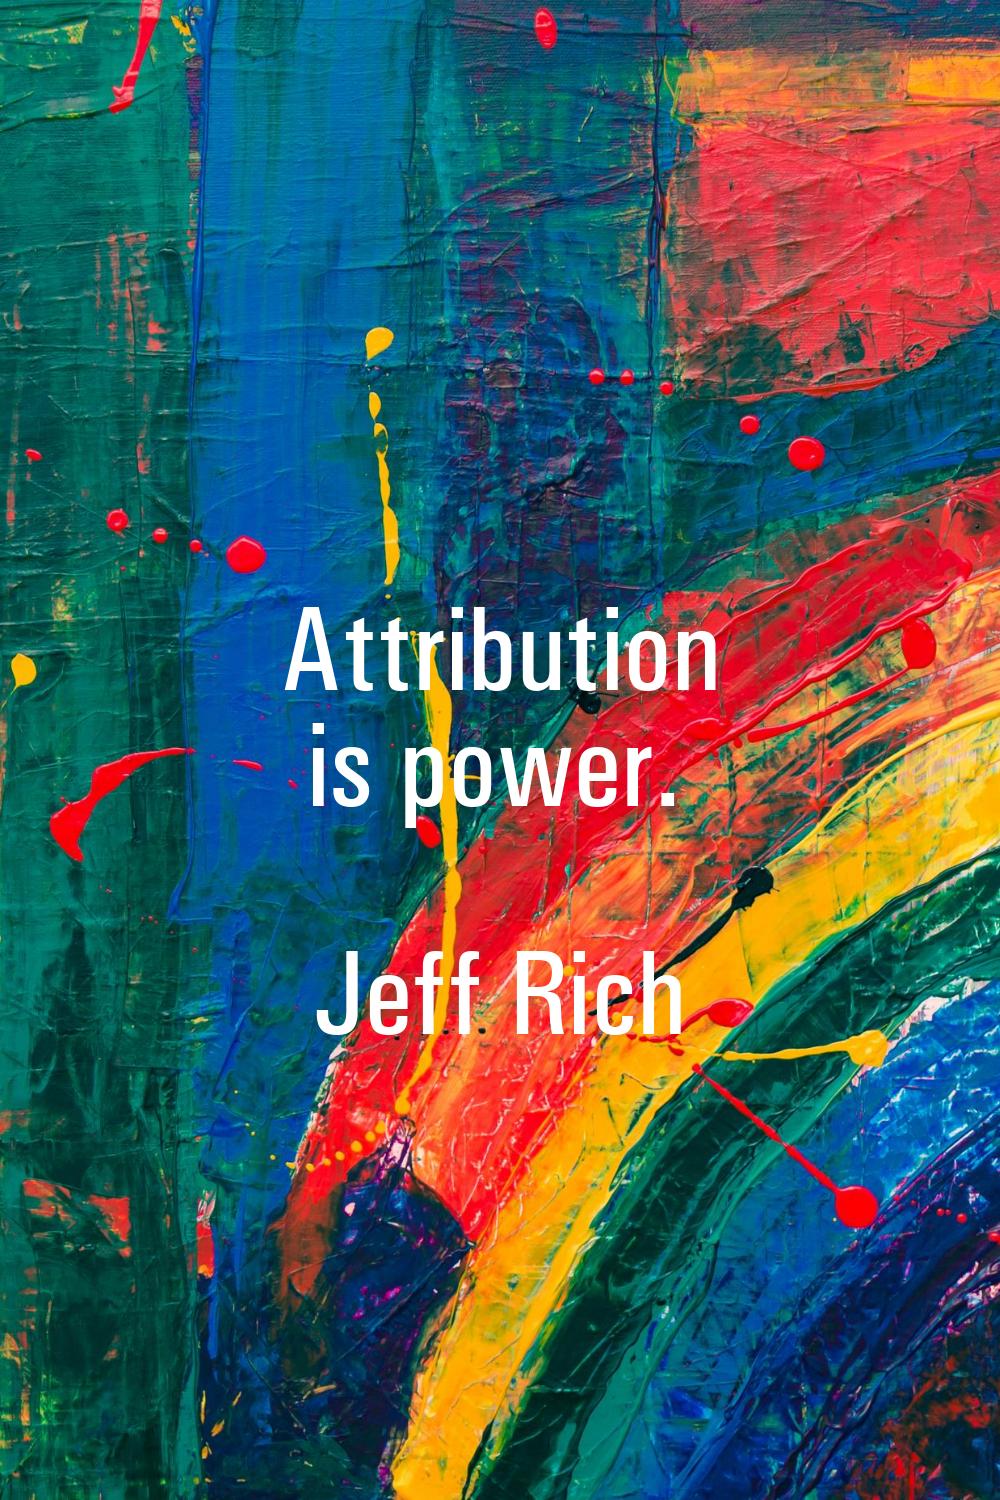 Attribution is power.